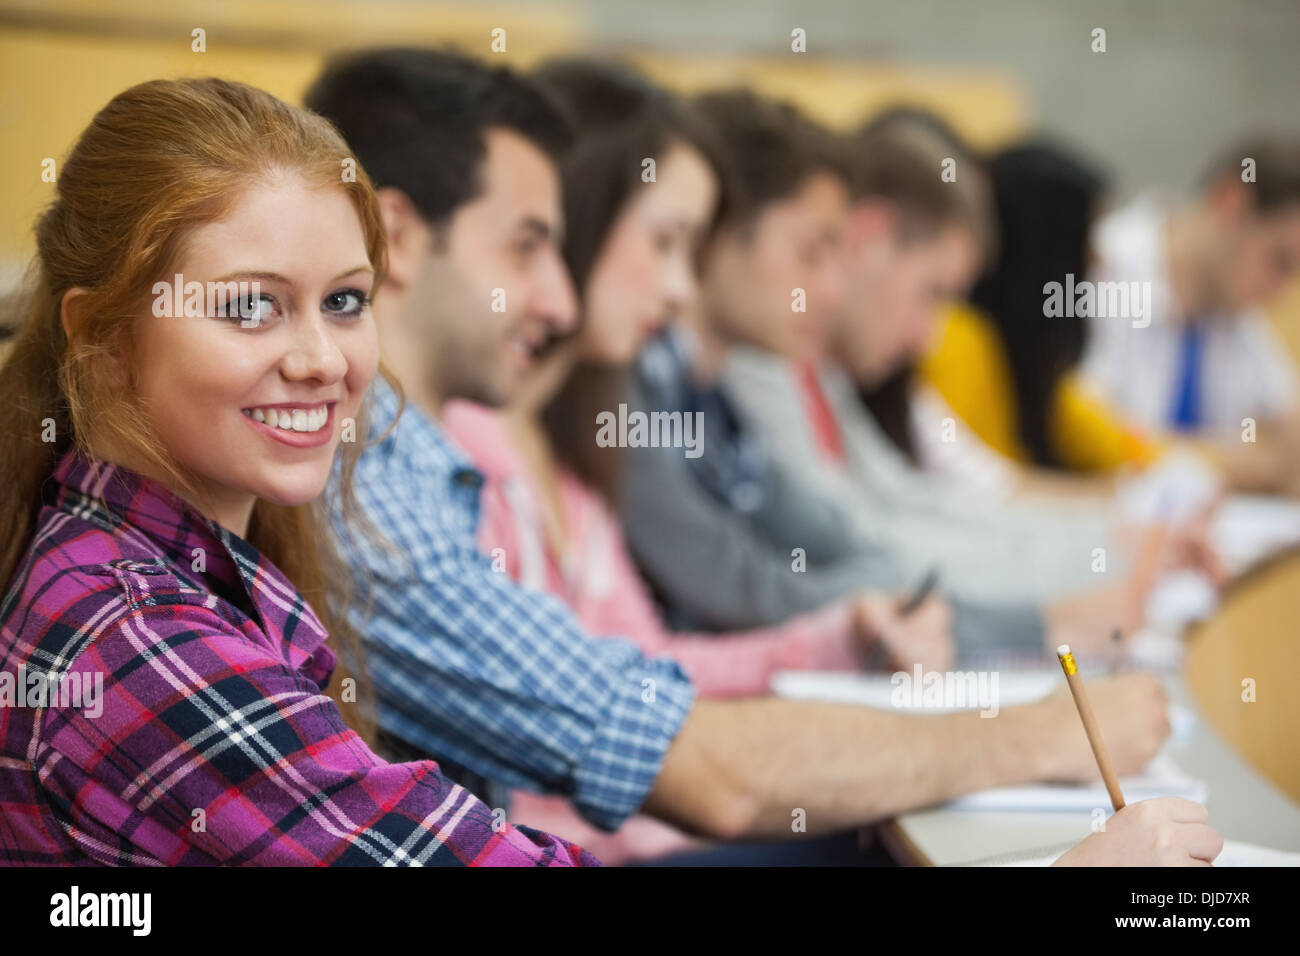 Row of students listening in a lecture hall with one smiling at camera Stock Photo